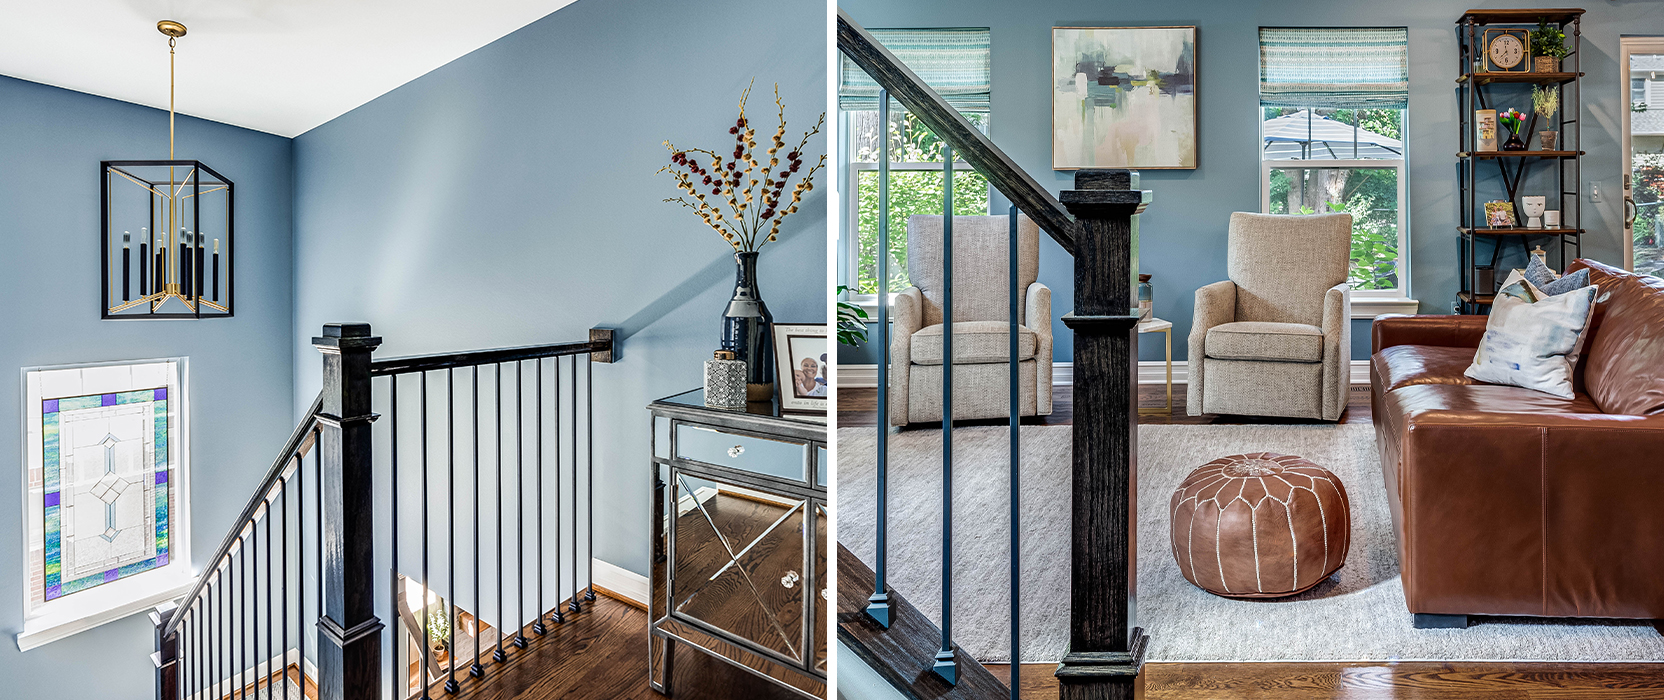 Left image: Stairwell with blue painted walls and stained glass window on landing. Right image: Living room photo taken from bottom of stairs, with leather couch and pouf, twin armchairs and light blue walls.